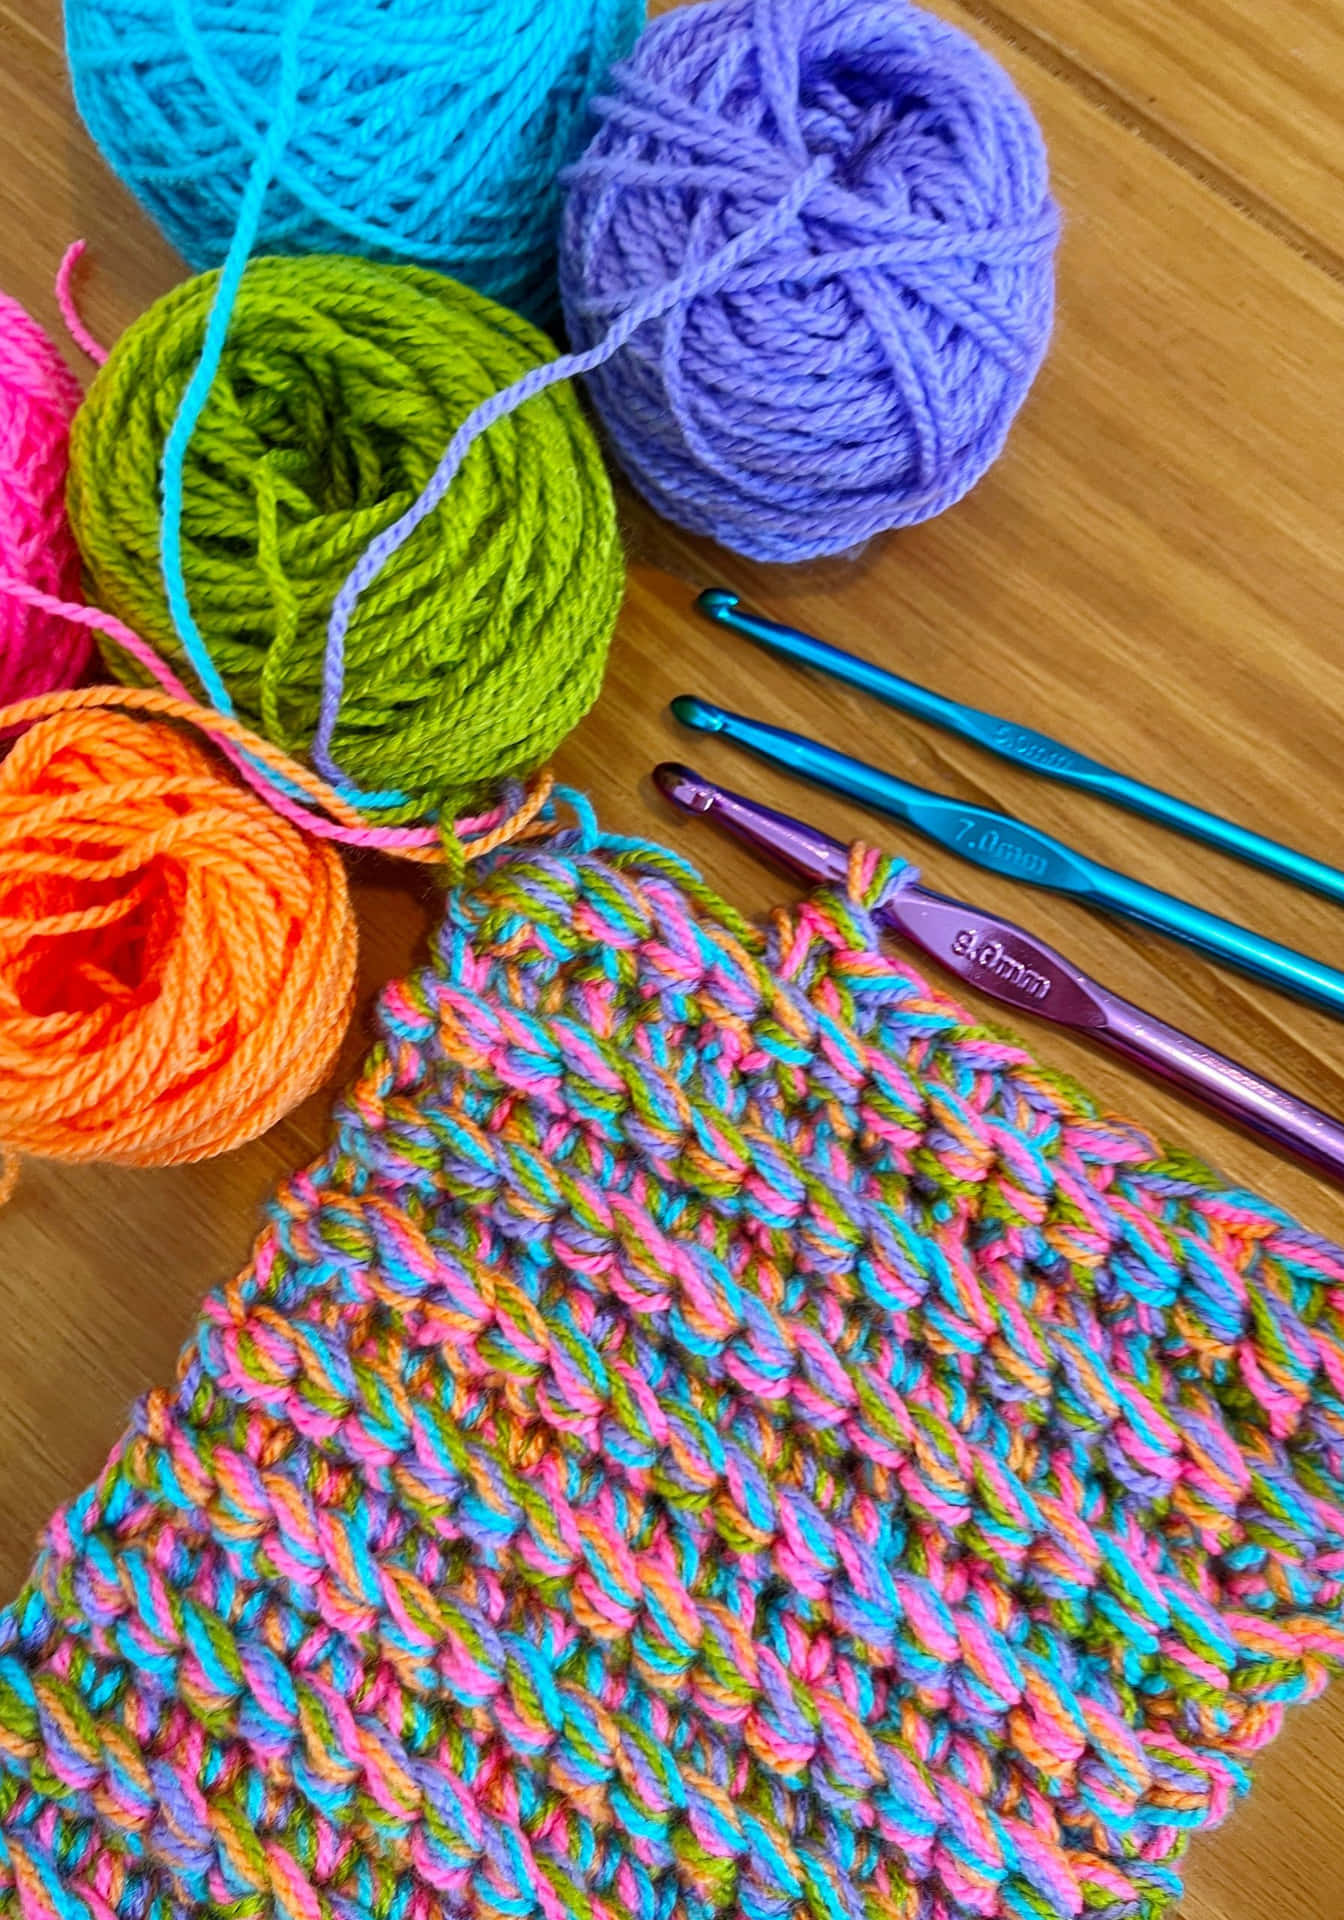 Download A Colorful Crocheted Bag With Yarn And Knitting Needles ...